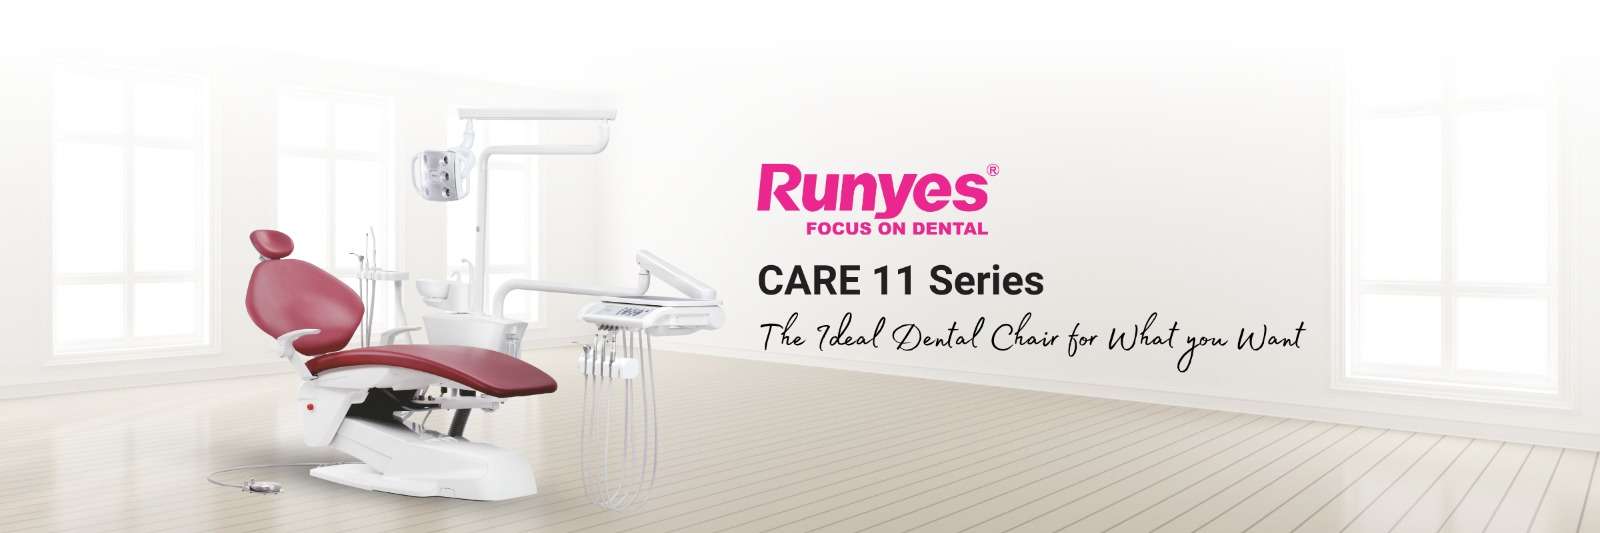 Runyes Care 11 Series Dental Chair_banner_image